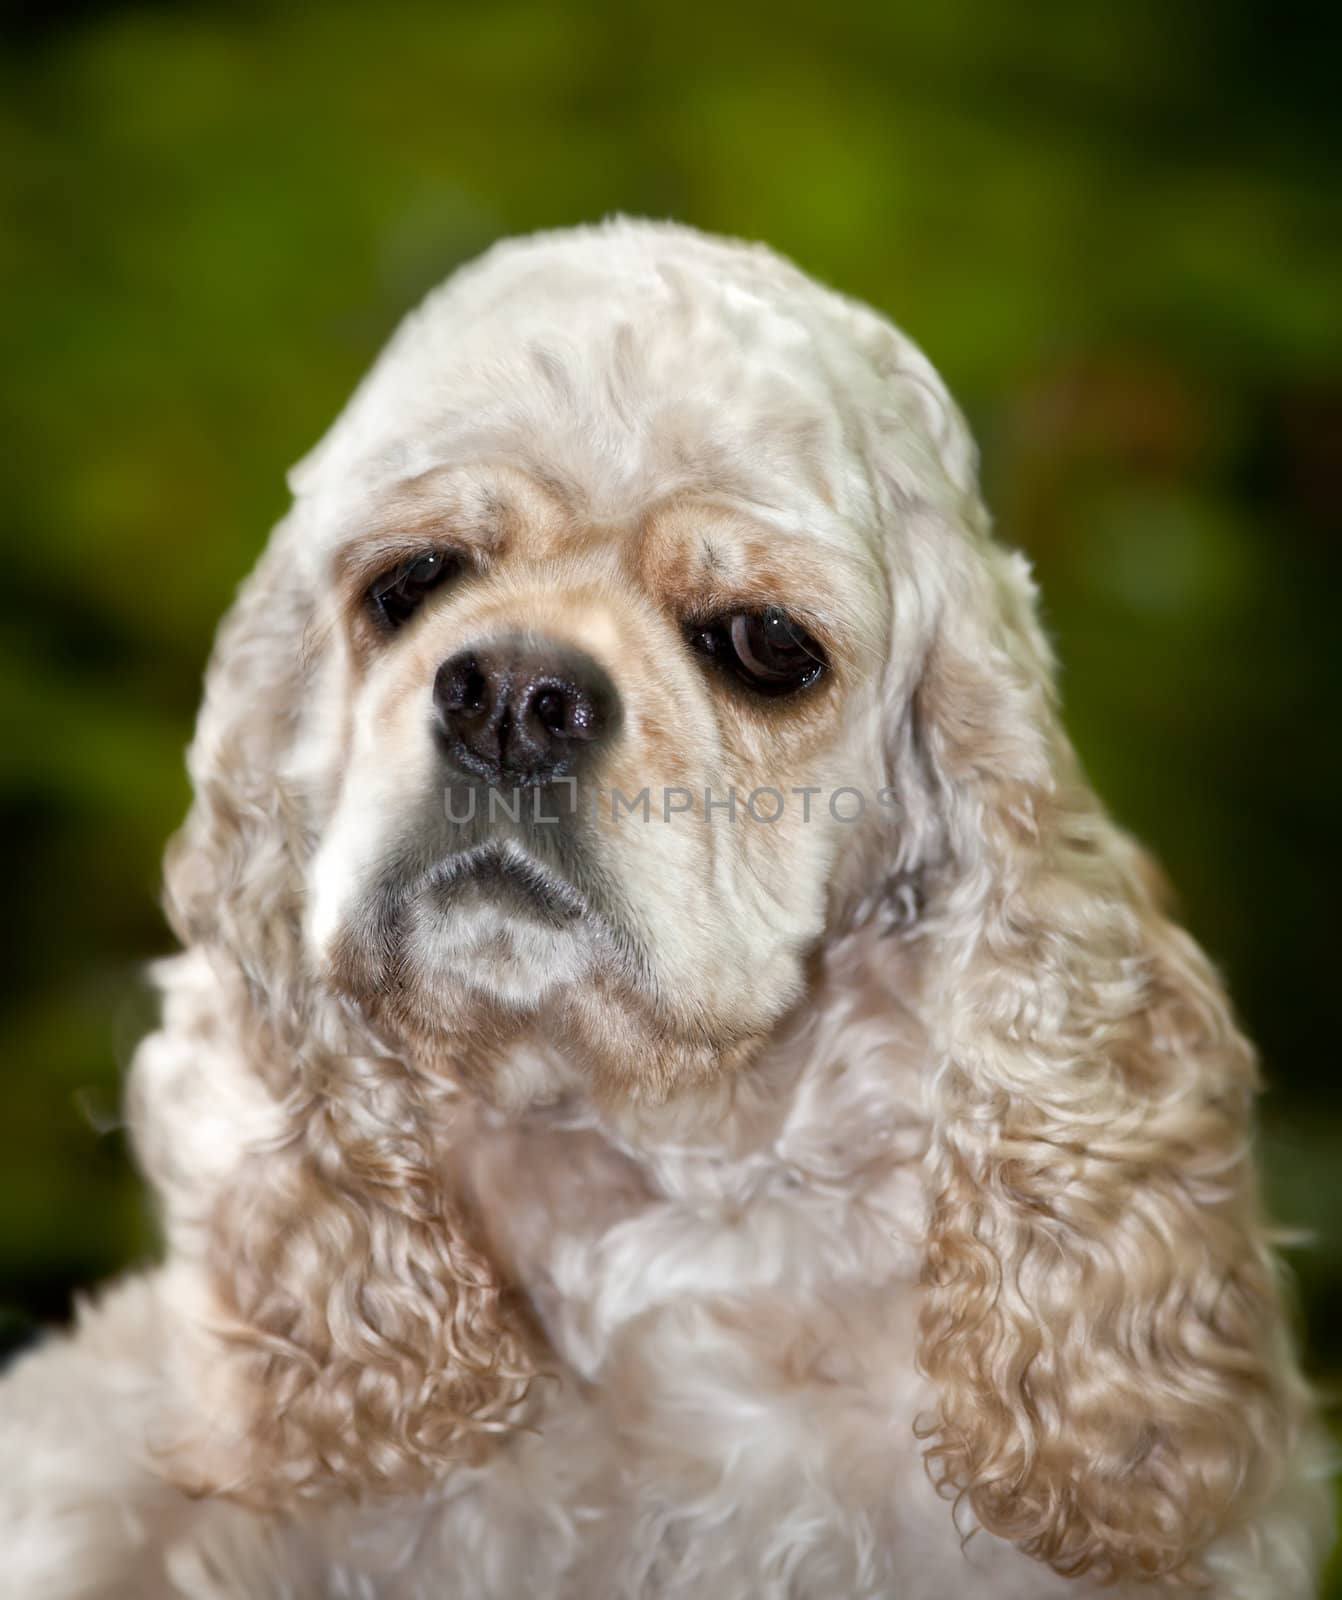 American Cocker Spaniel (1,5 years) on blured background